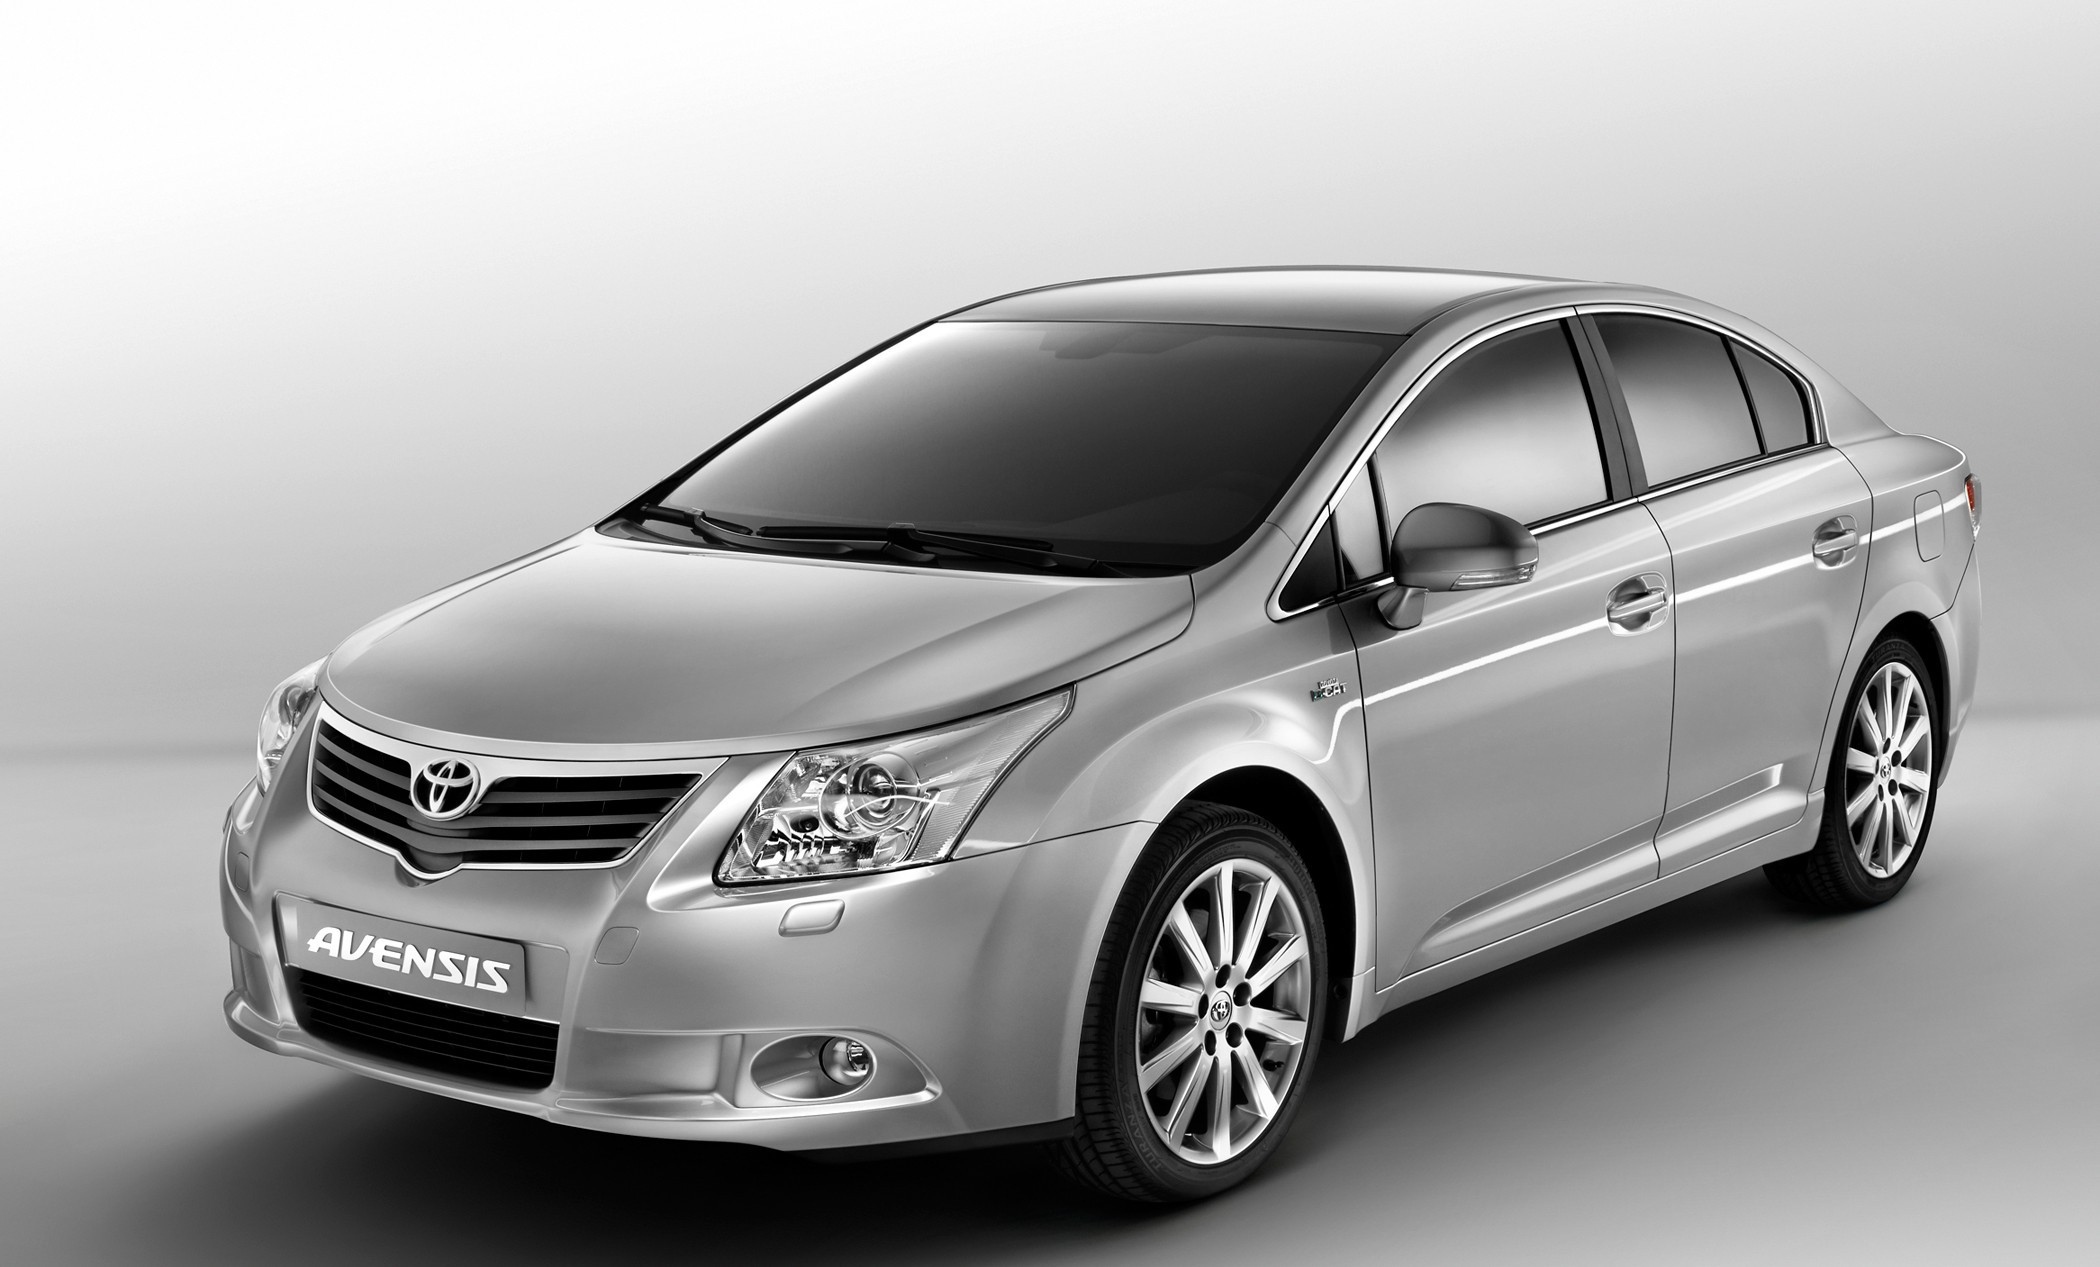 New toyota avensis wallpapers